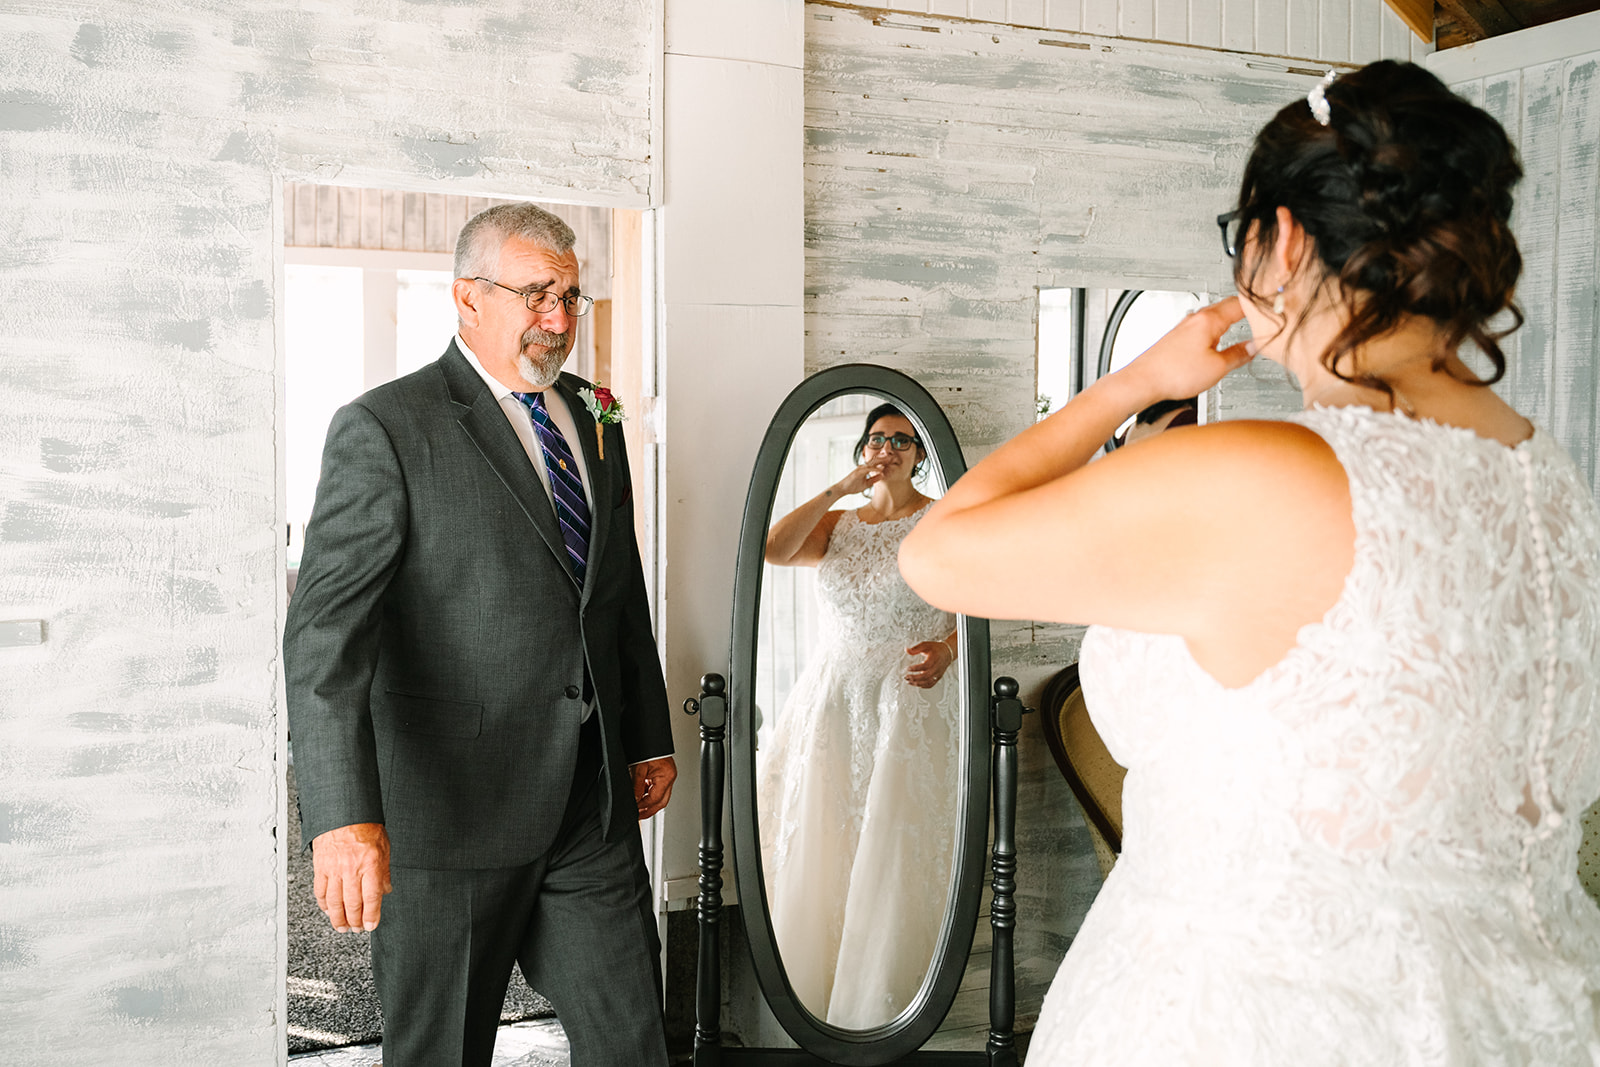 Bride and dad share an emotional moment together during their first look